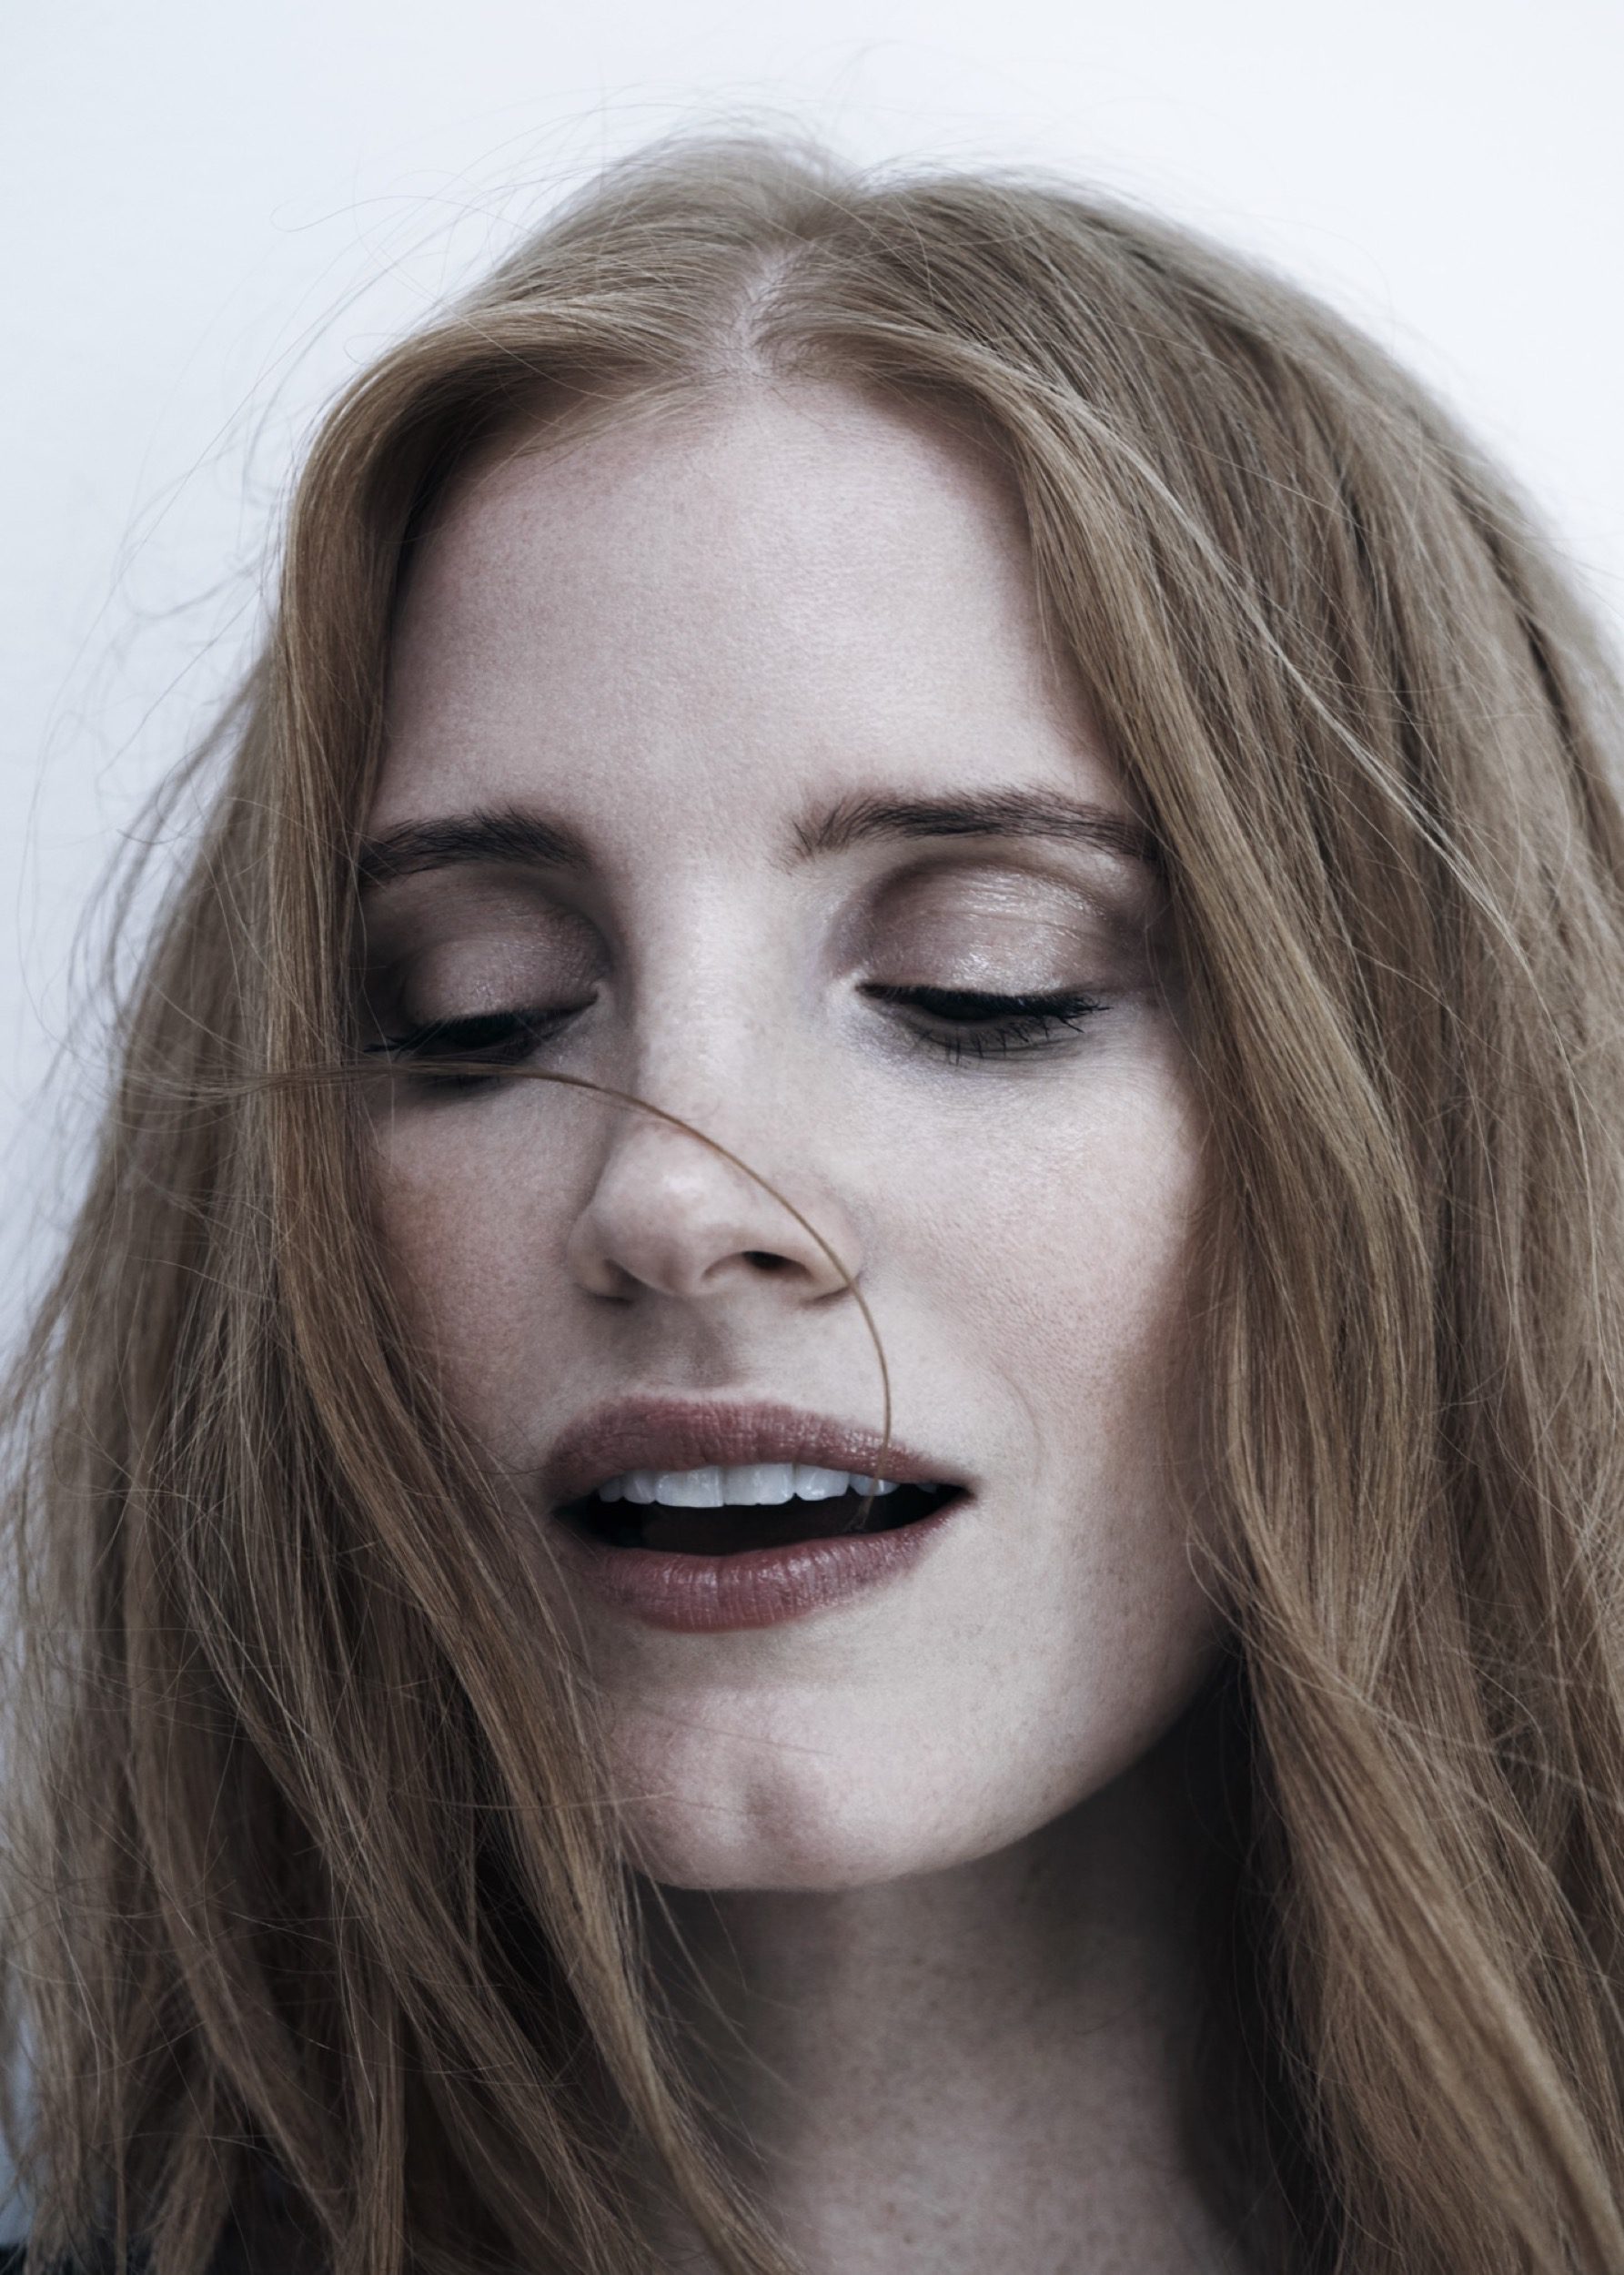 kathrin-hohberg-cmag-jessica-chastain-jan-welters-02